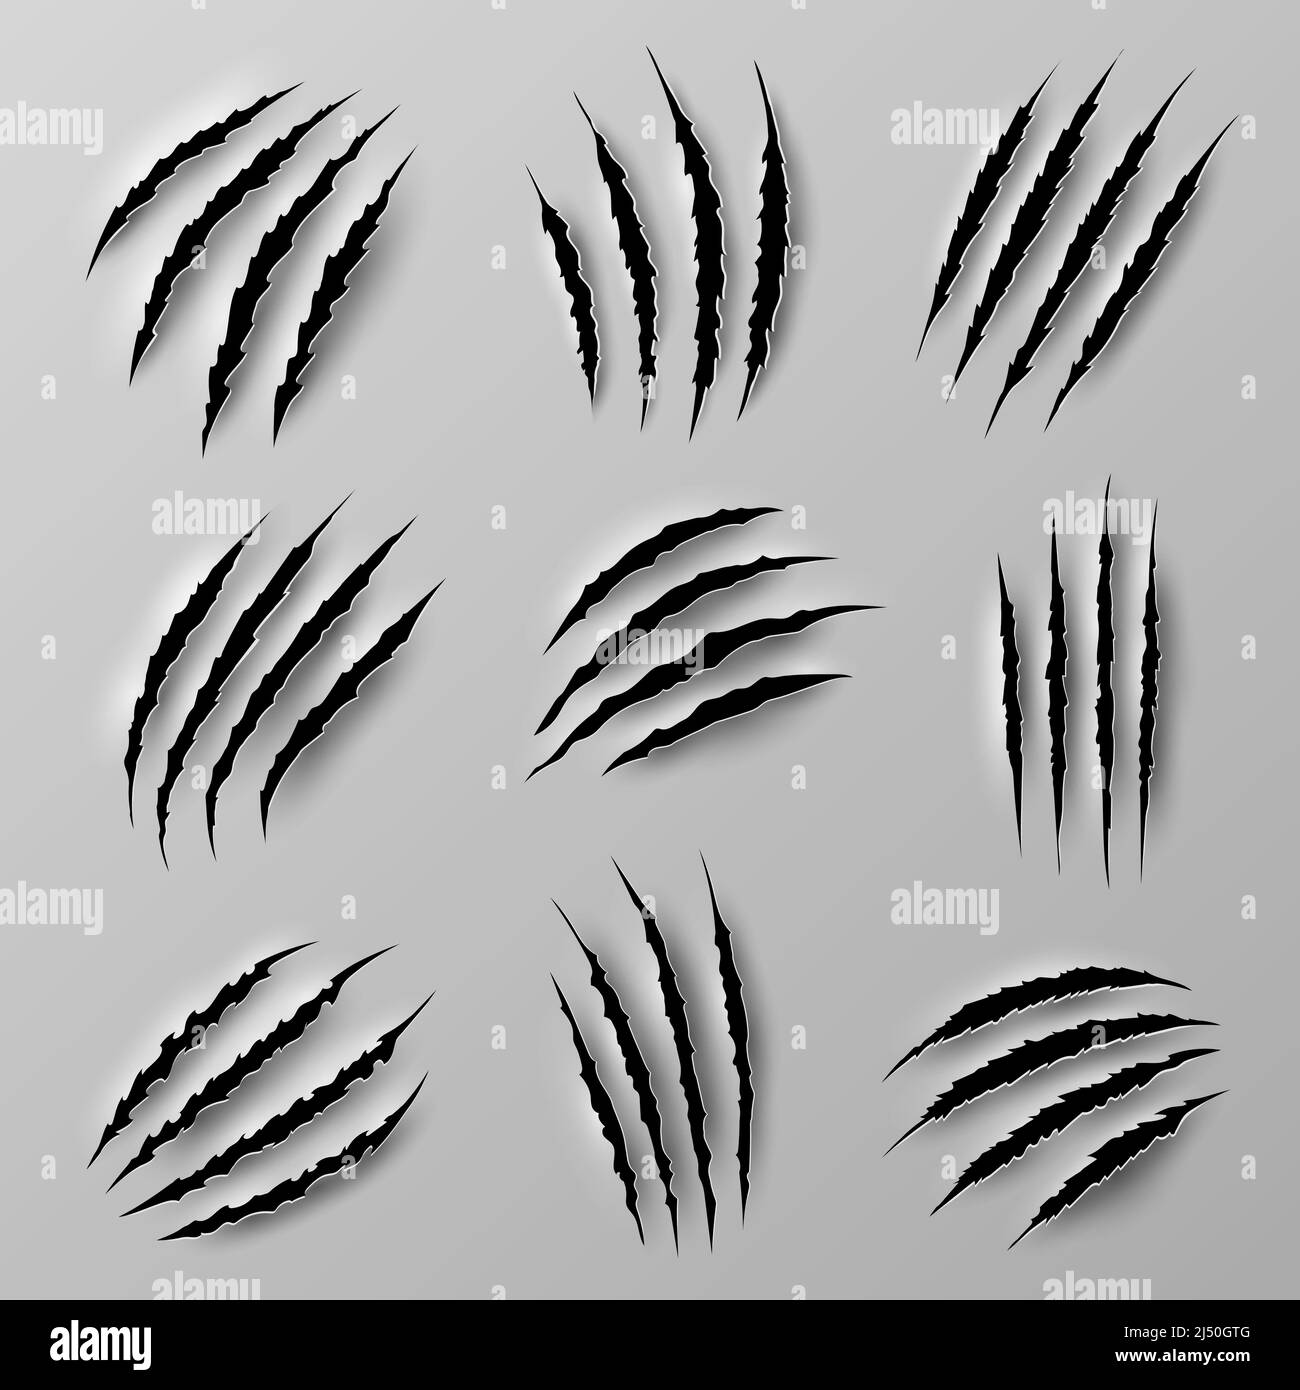 Claw marks scratches of wild animals. Monster, lion or bear paw nails traces on wallpaper with poles and torn edges. Horror beast, werewolf or cat 3d realistic vector claws strike trails ripping paper Stock Vector